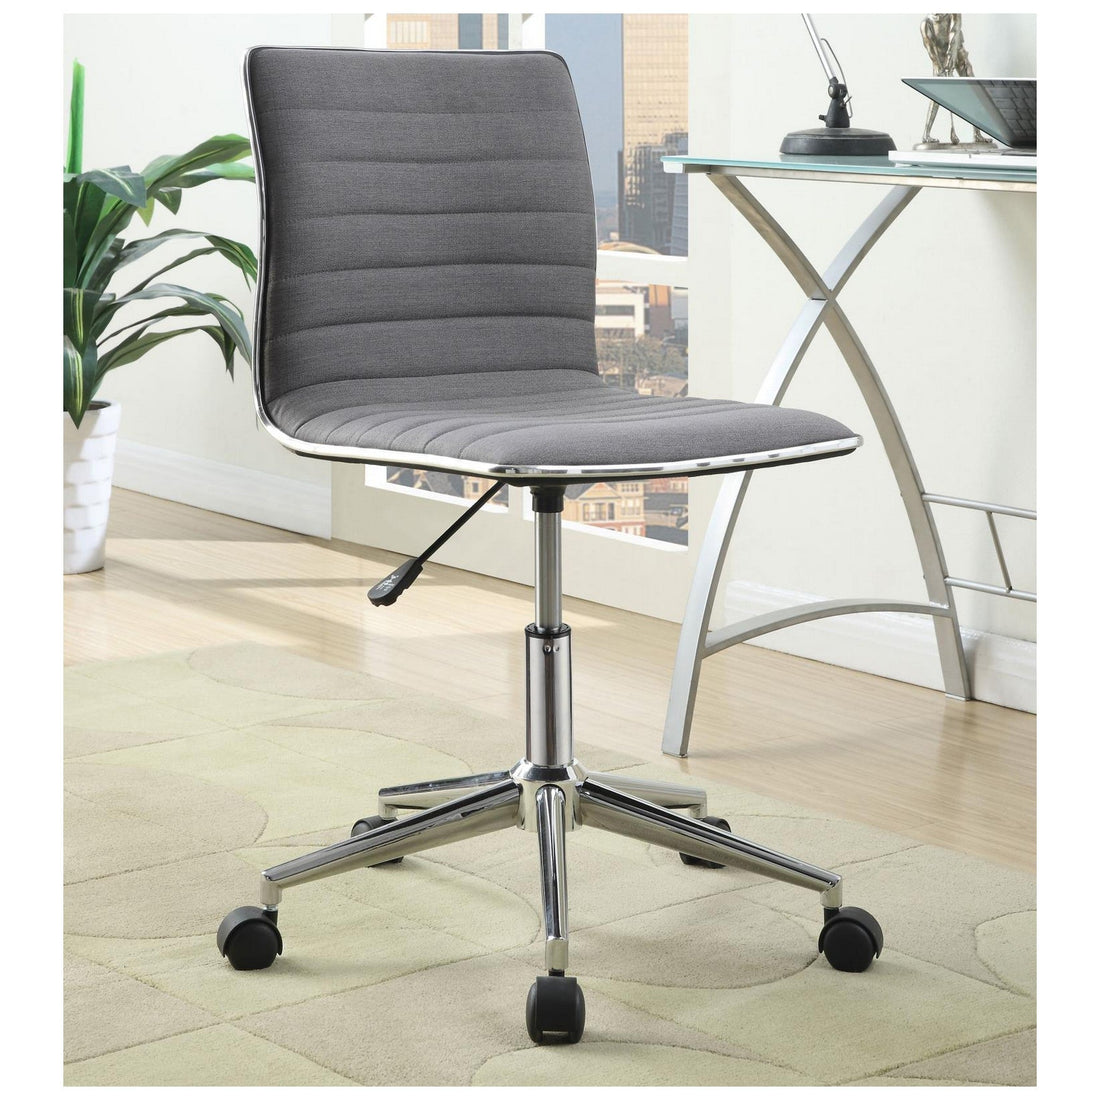 Chryses Adjustable Height Office Chair Grey and Chrome 800727